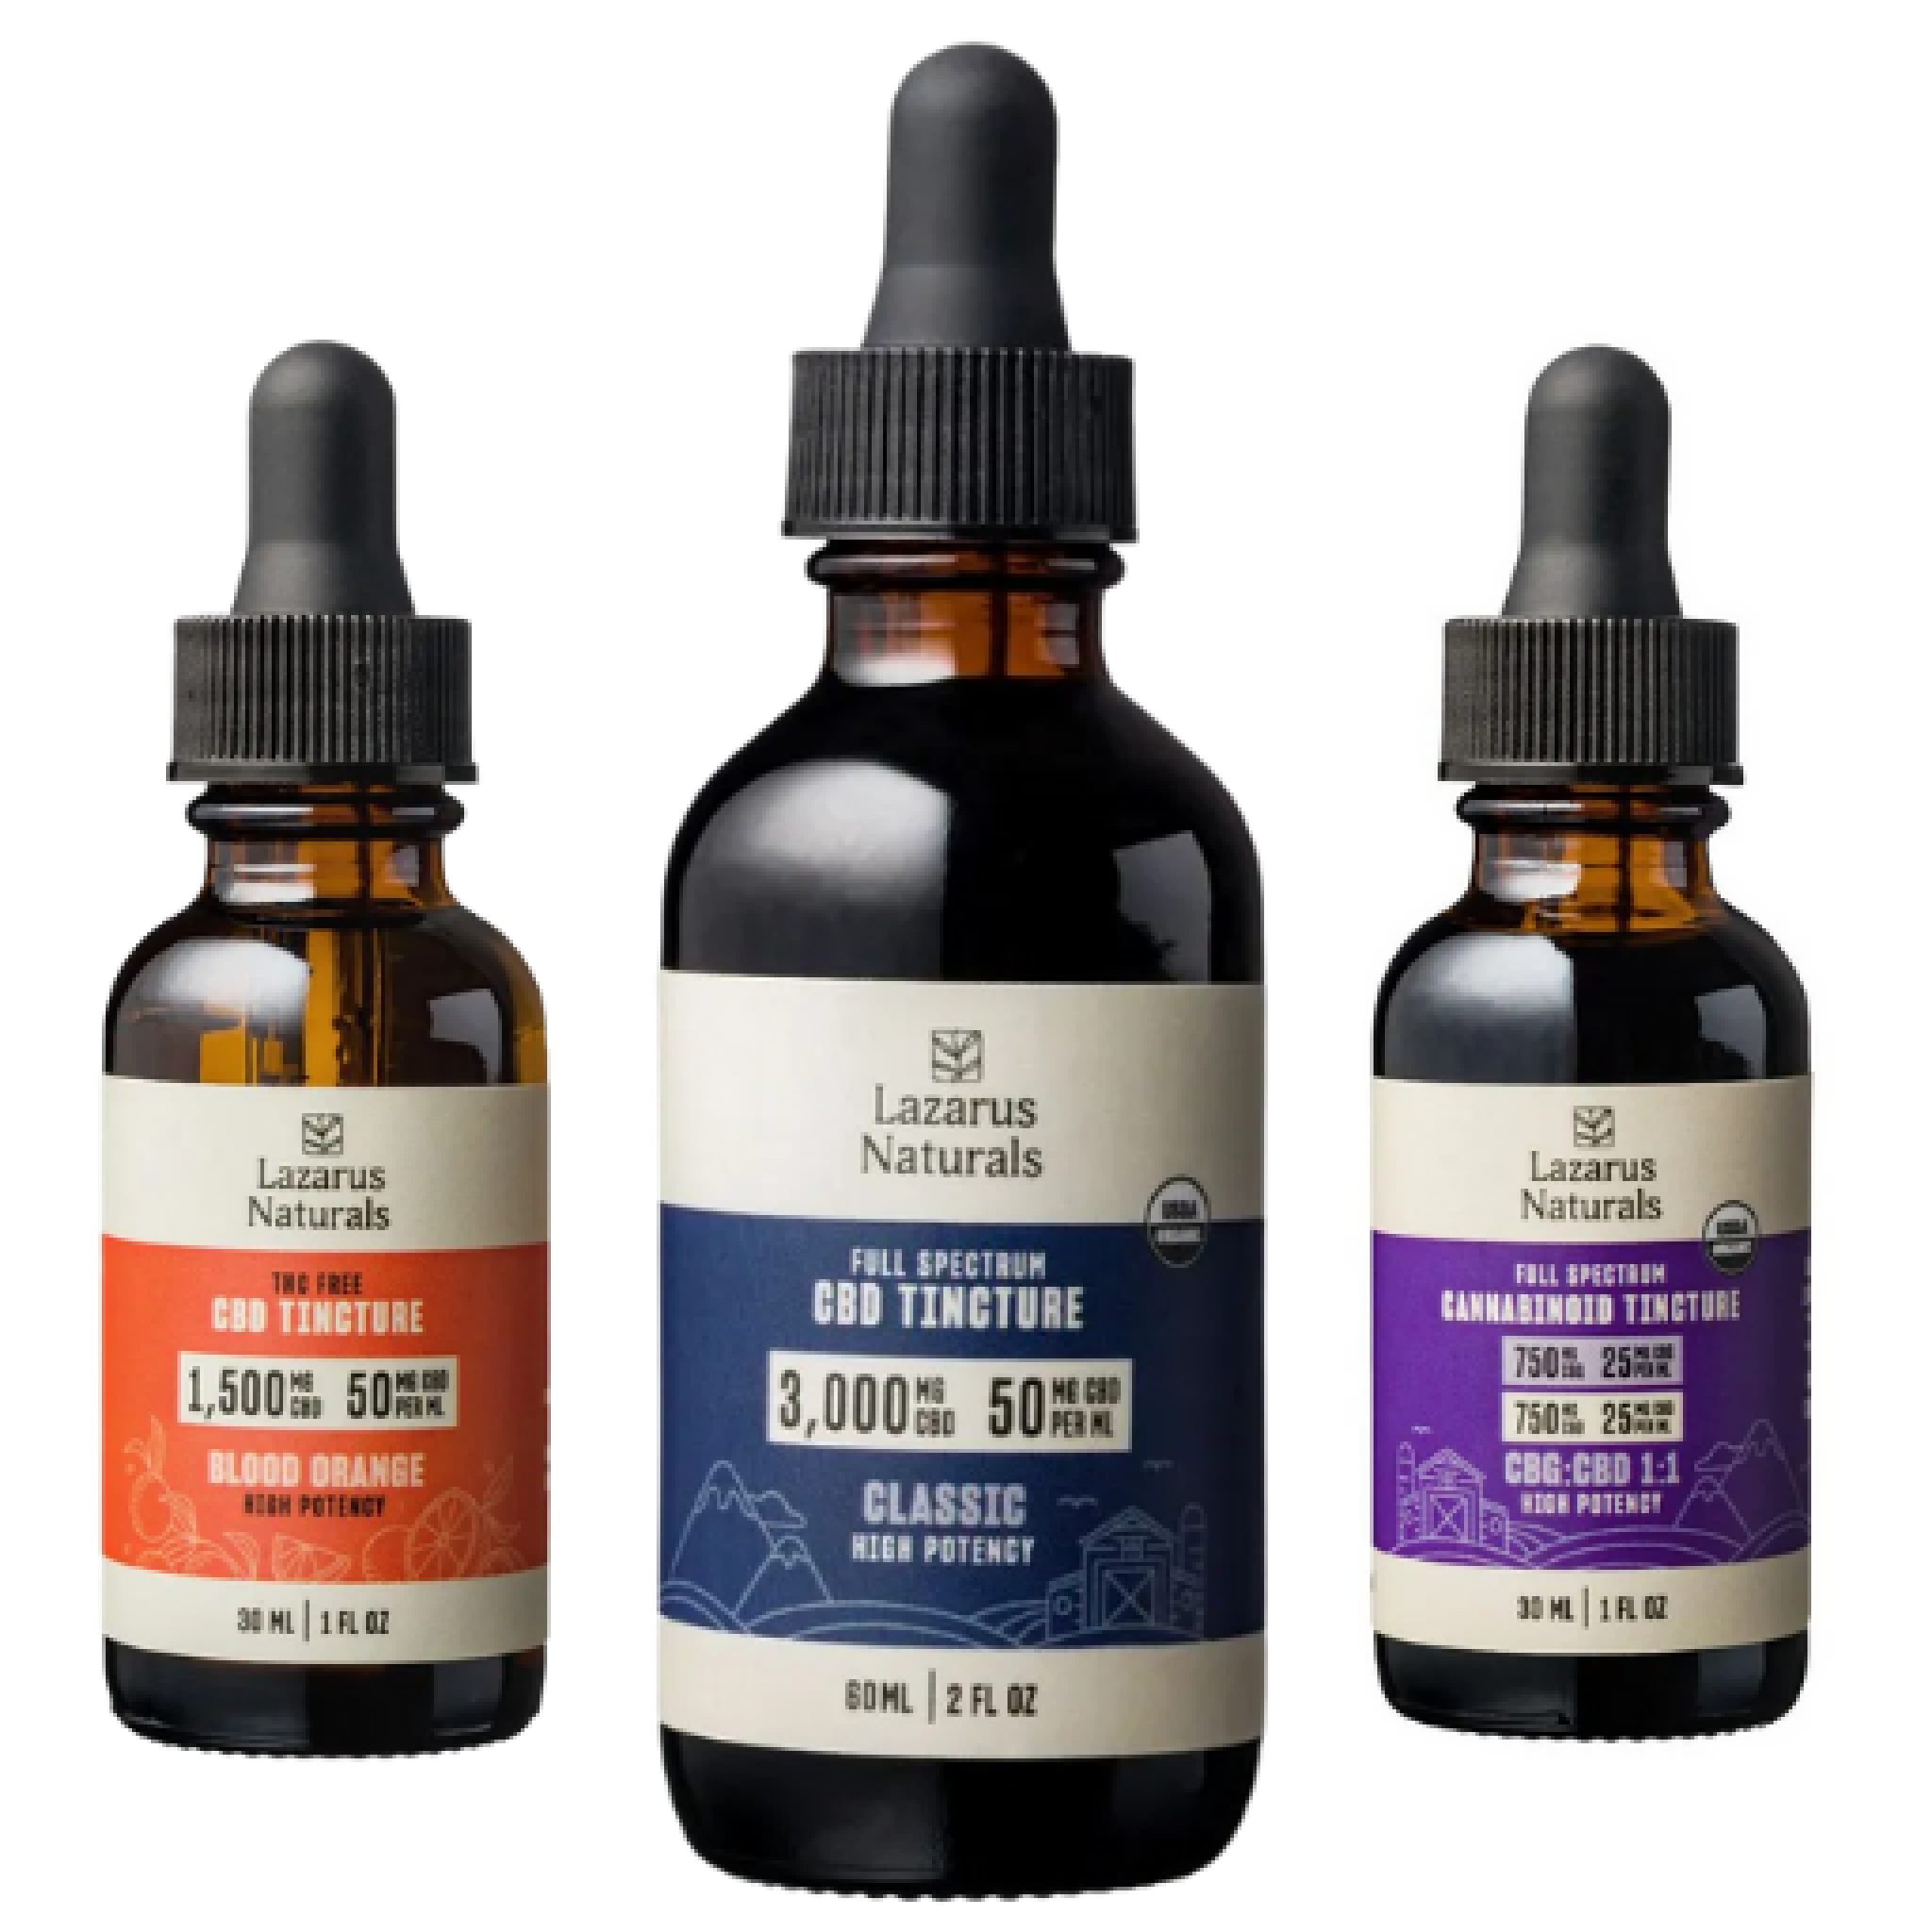 Lazarus Naturals Coupon Code (Official Site) Verified Today